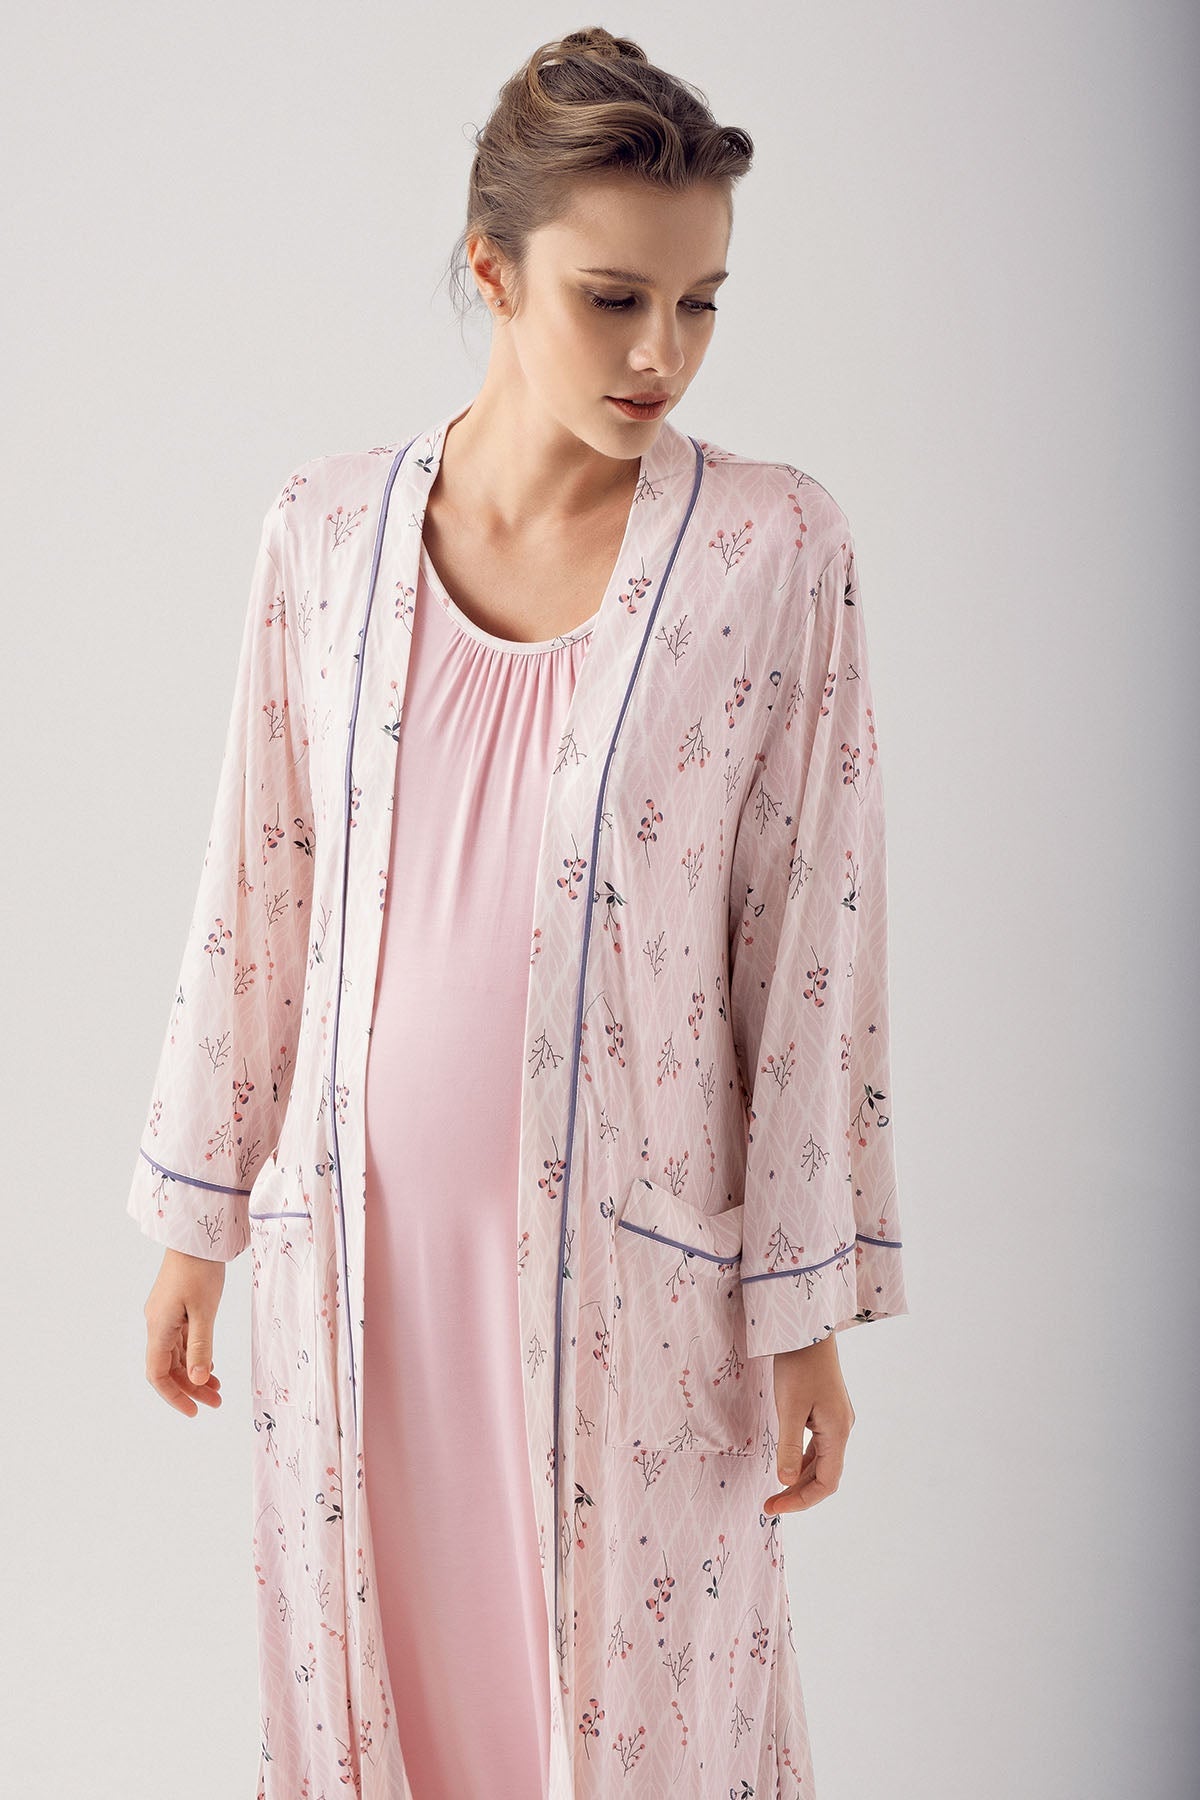 Breastfeeding Detailed Maternity & Nursing Nightgown With Patterned Robe Powder - 14404